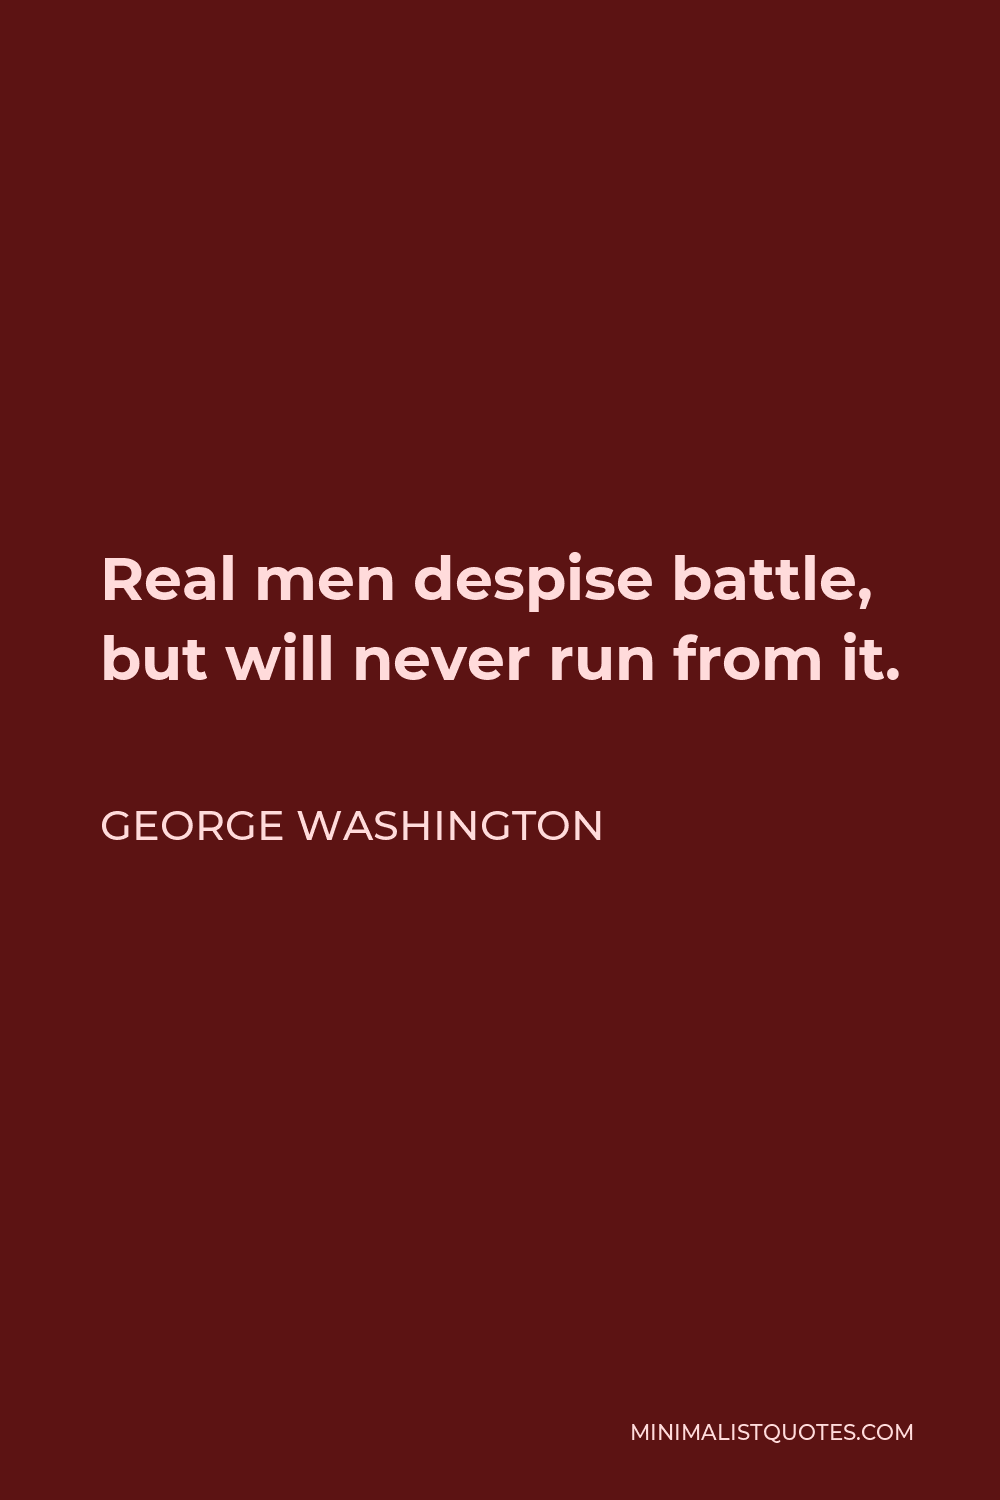 George Washington Quote - Real men despise battle, but will never run from it.